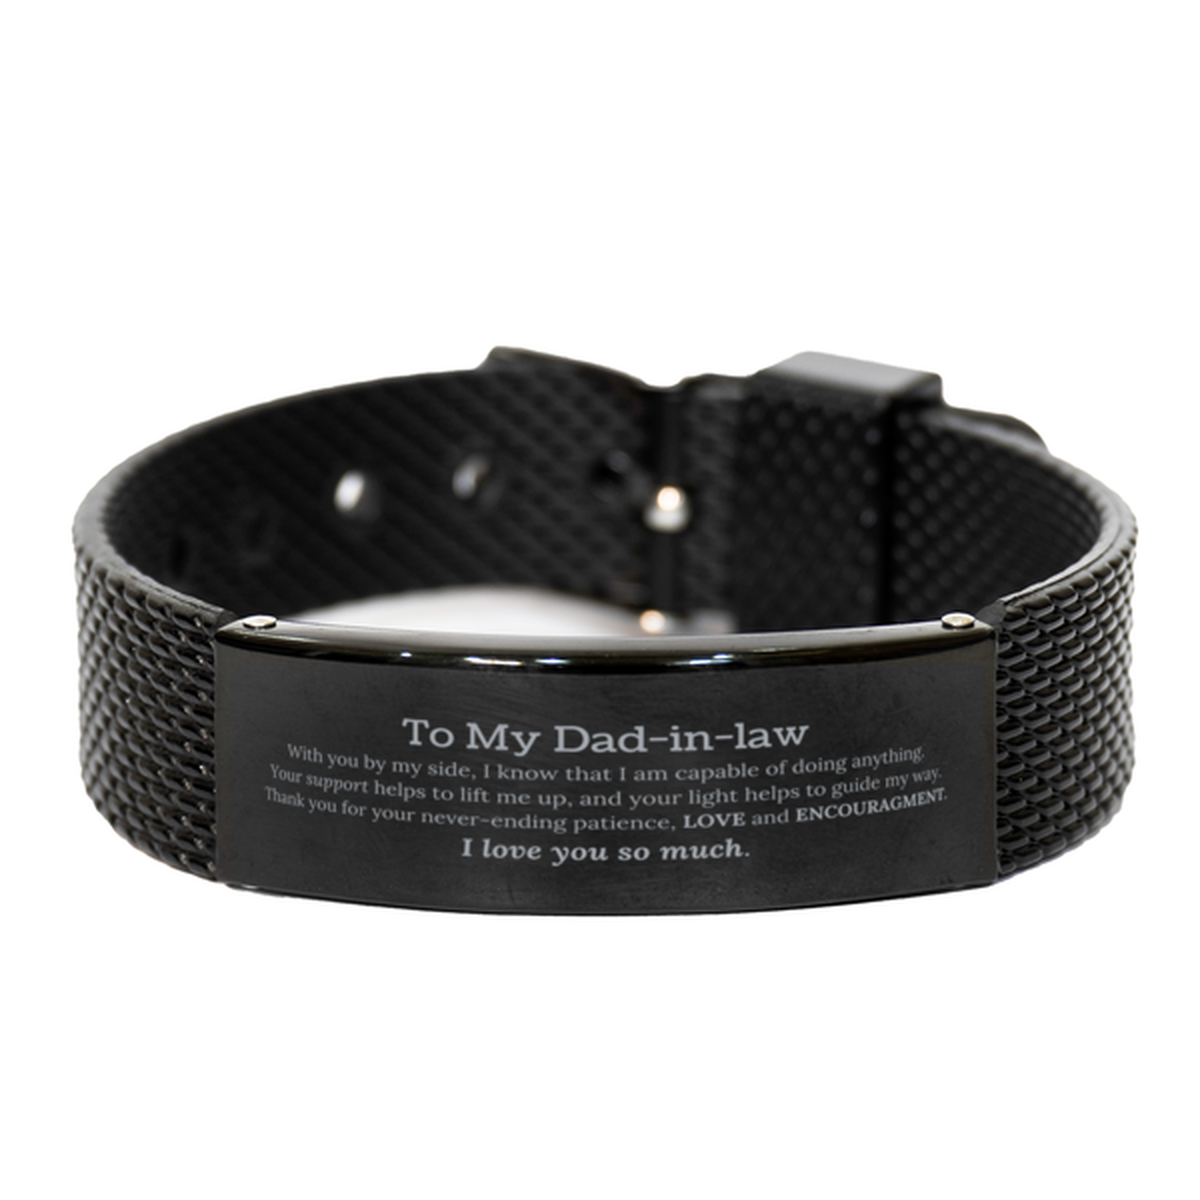 Appreciation Dad-in-law Black Shark Mesh Bracelet Gifts, To My Dad-in-law Birthday Christmas Wedding Keepsake Gifts for Dad-in-law With you by my side, I know that I am capable of doing anything. I love you so much